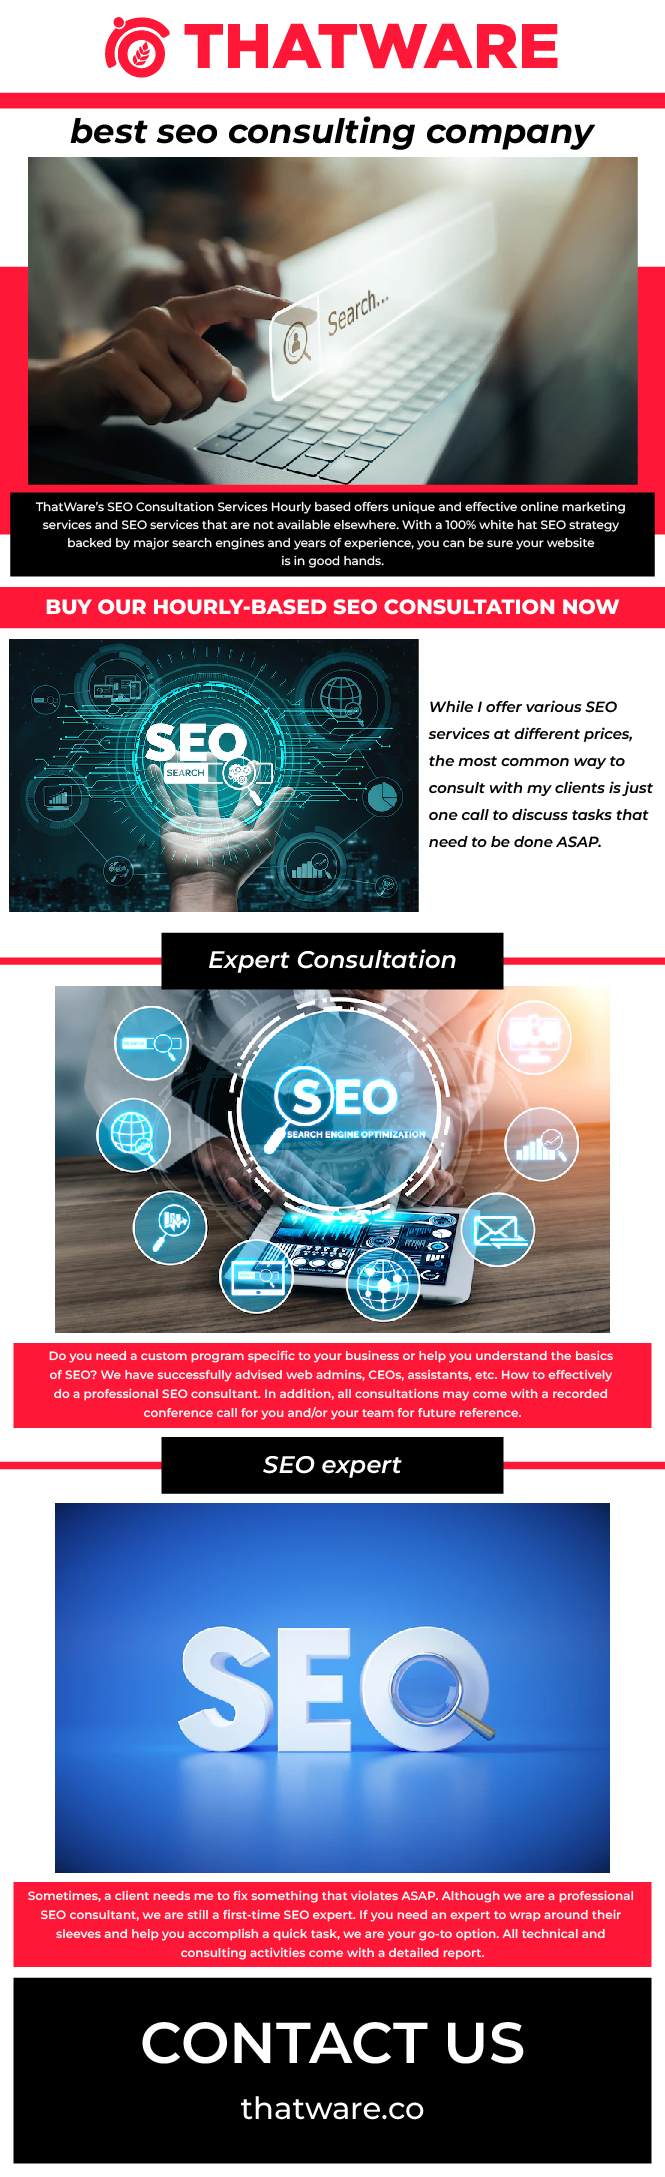 Hire the best seo consulting company for your firm – Thatware